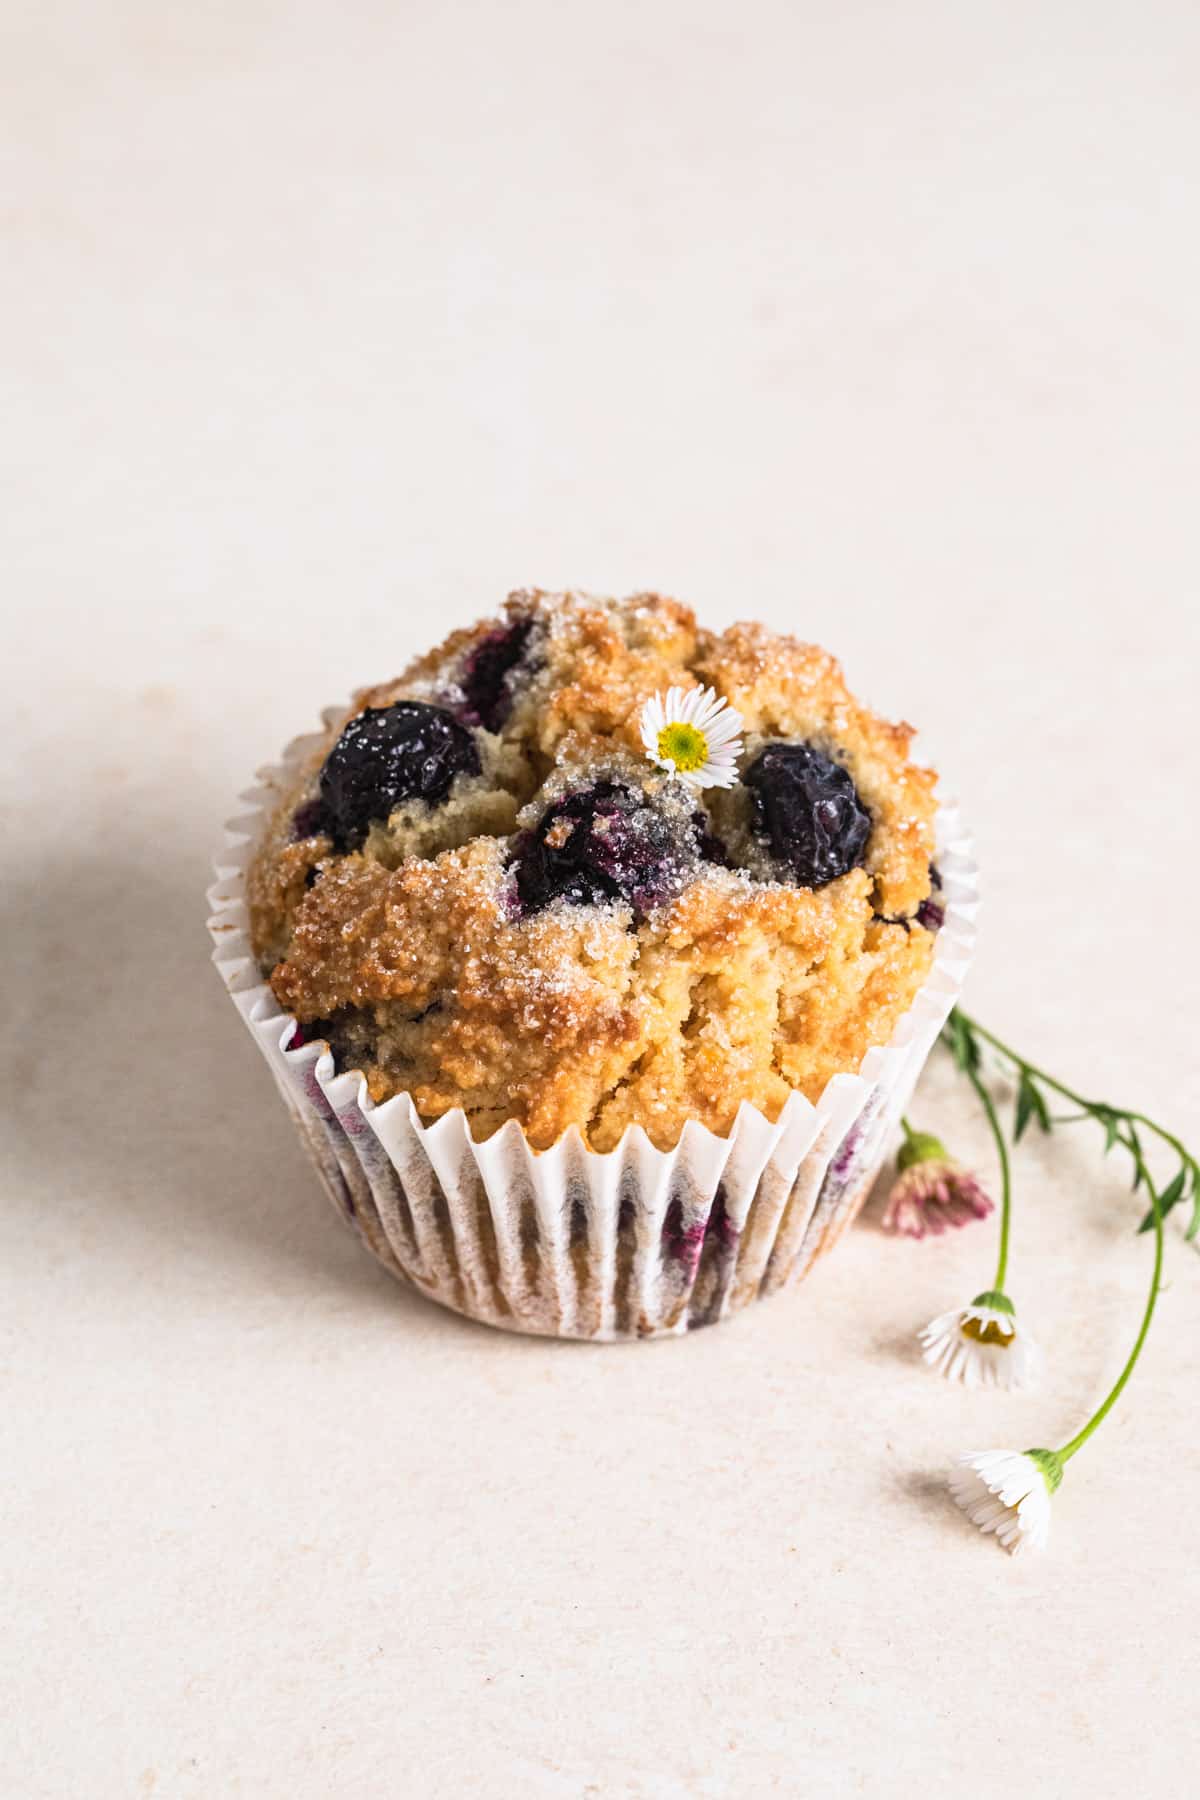 One Lemon Blueberry Gluten Free Muffin on a peach backdrop with a daisy on top of the muffin.